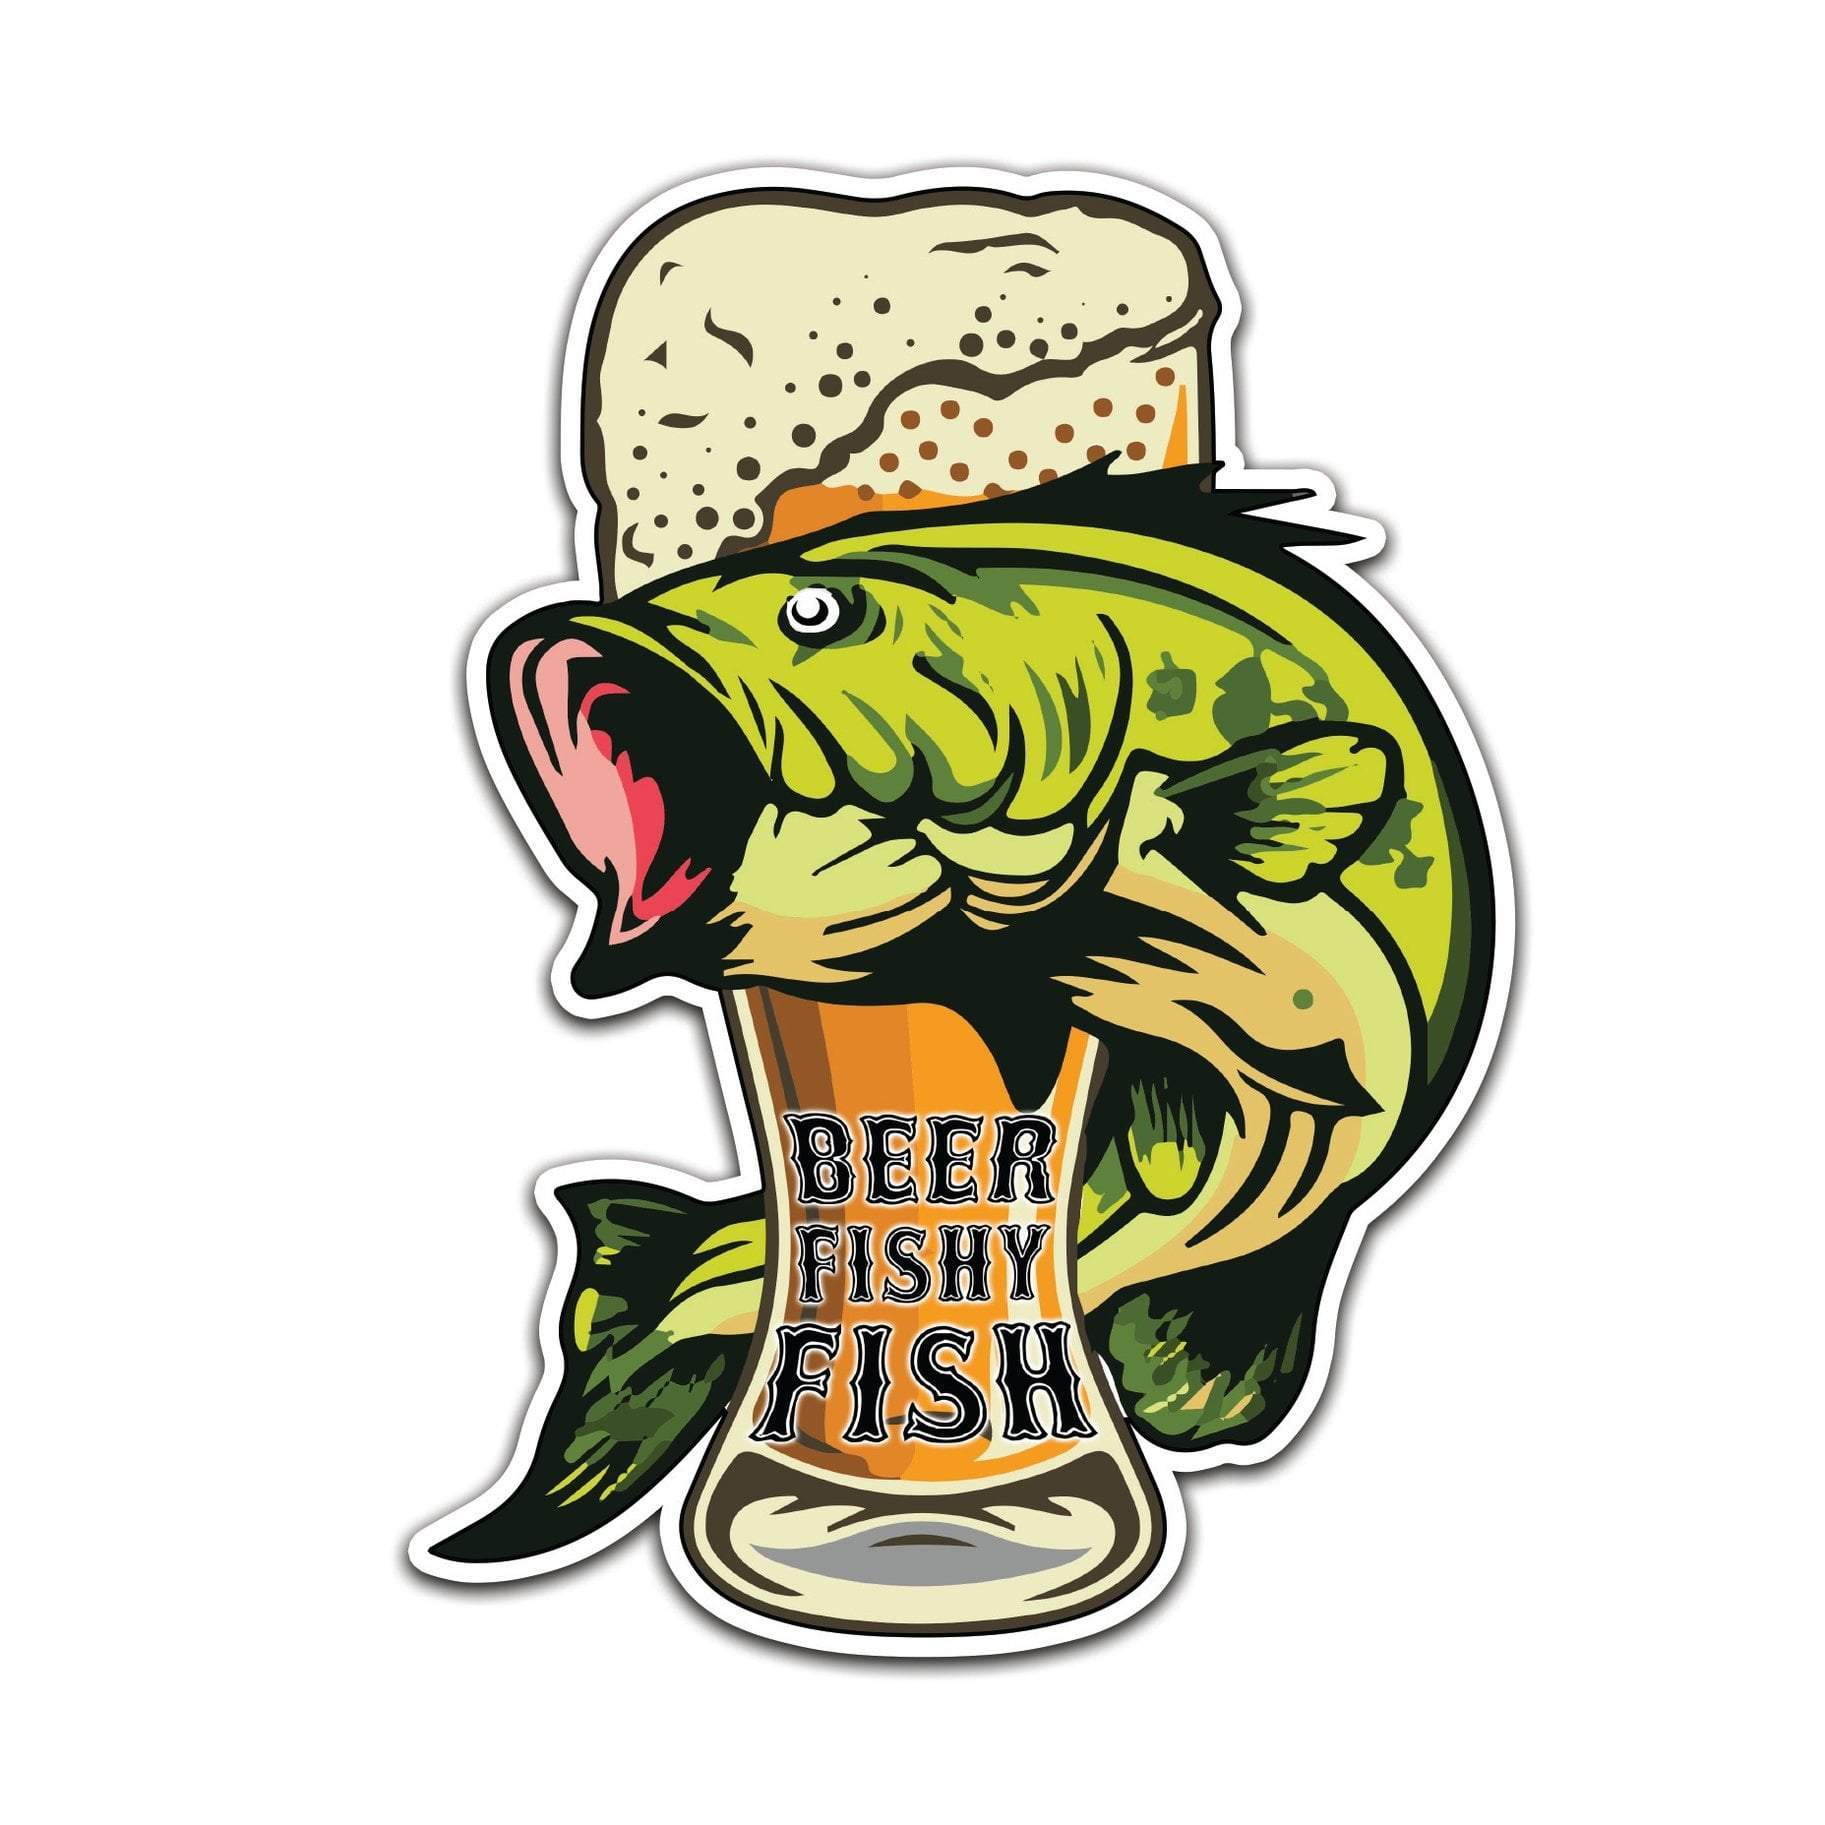 Beer Fishy Fish - Vinyl Sticker - Torched Products